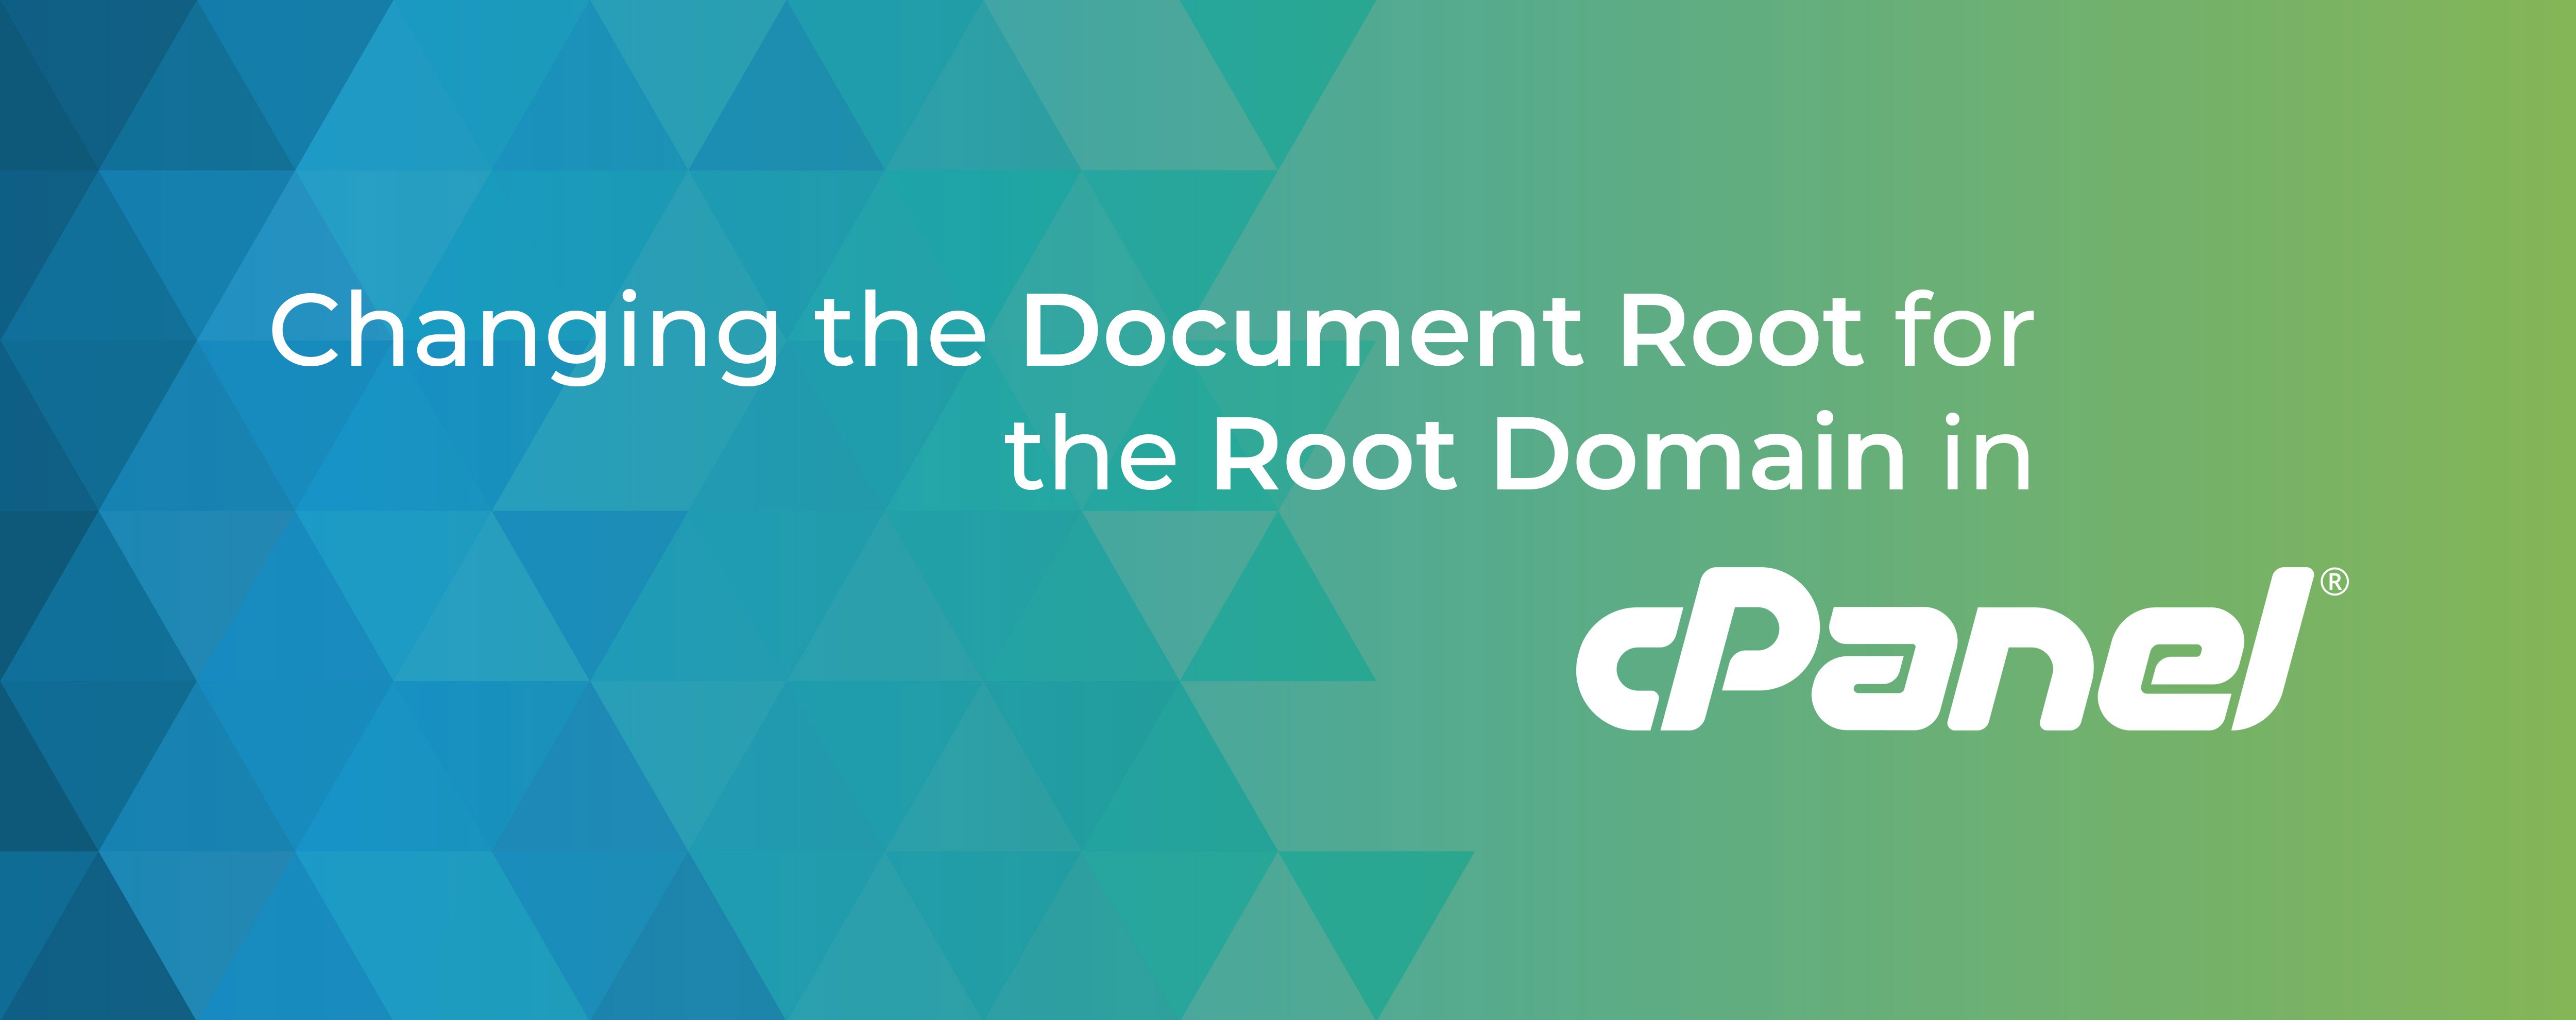 Changing the Document Root for the Root Domain in cPanel